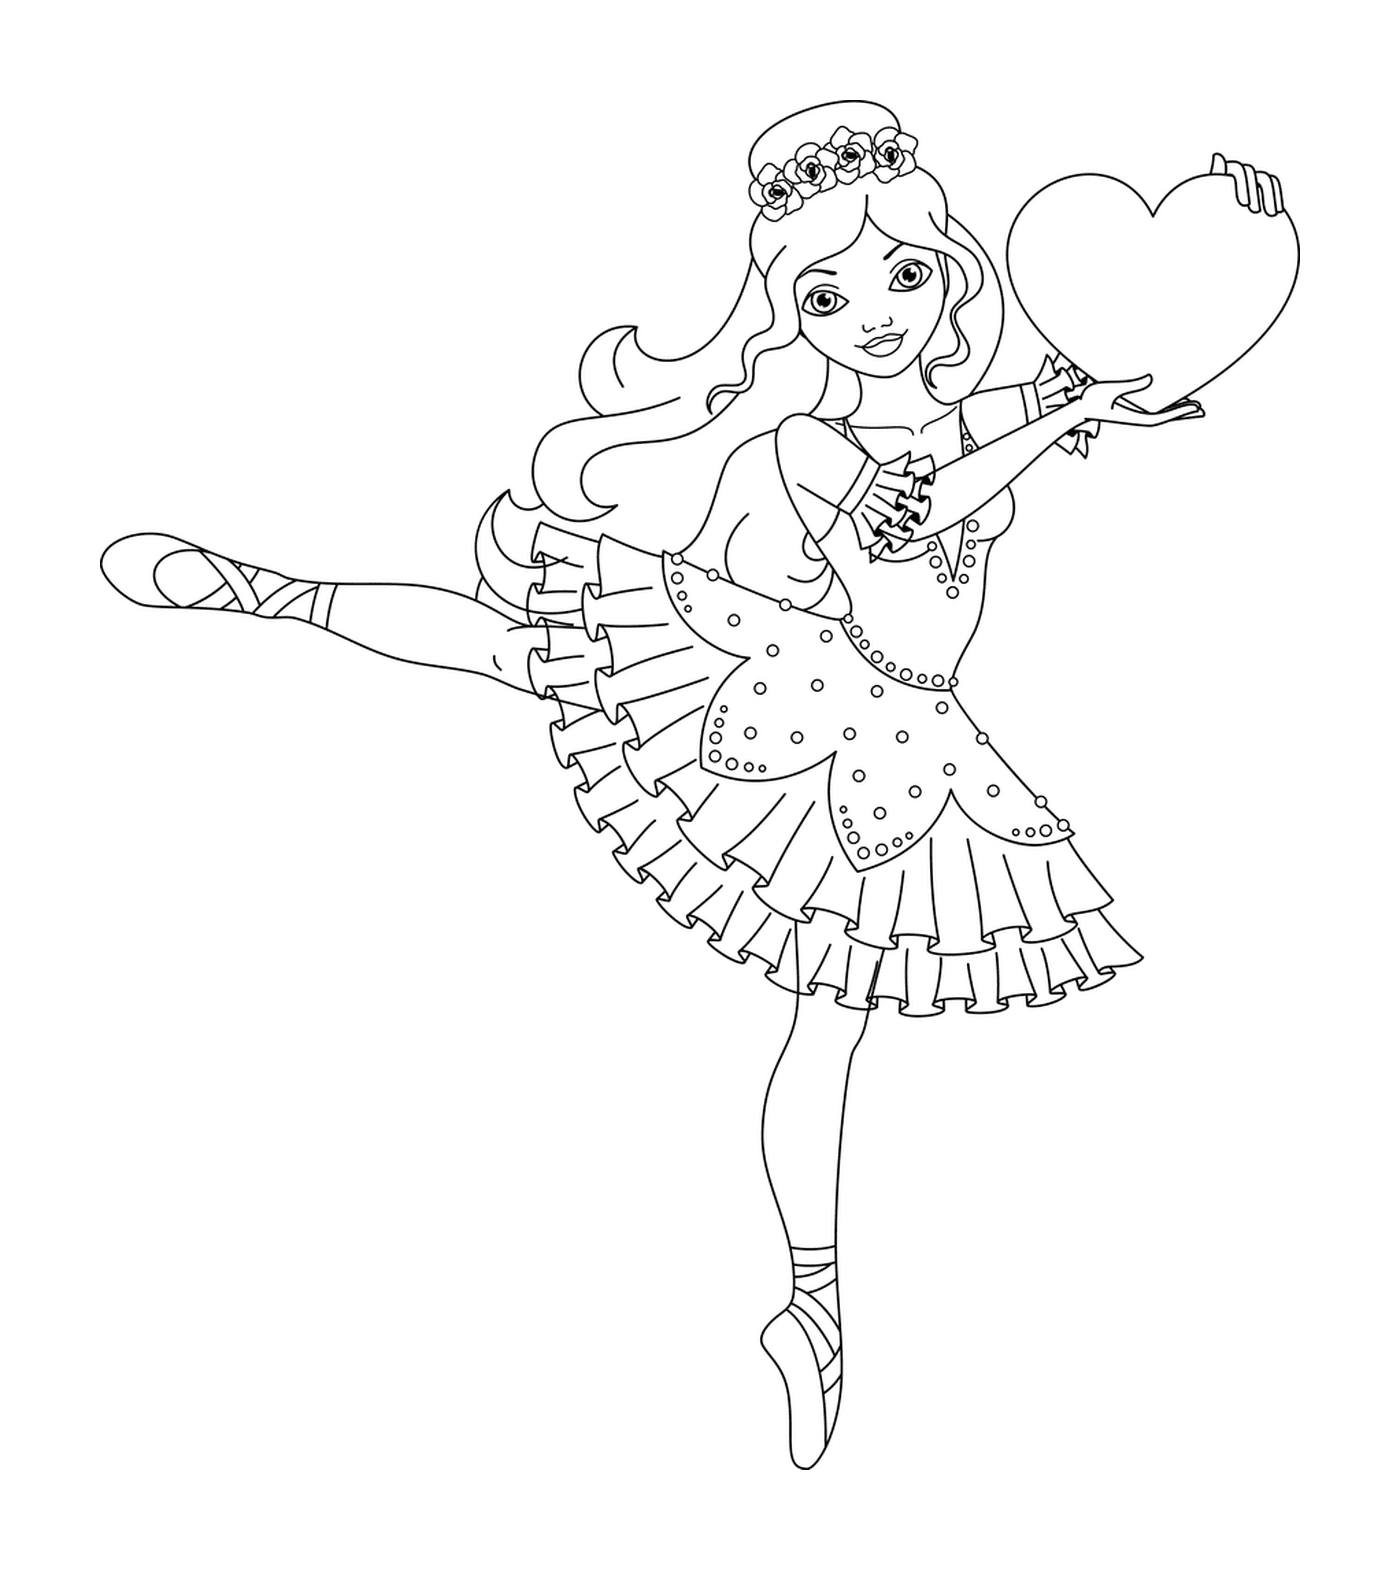  Dancer with a Heart in Hand 